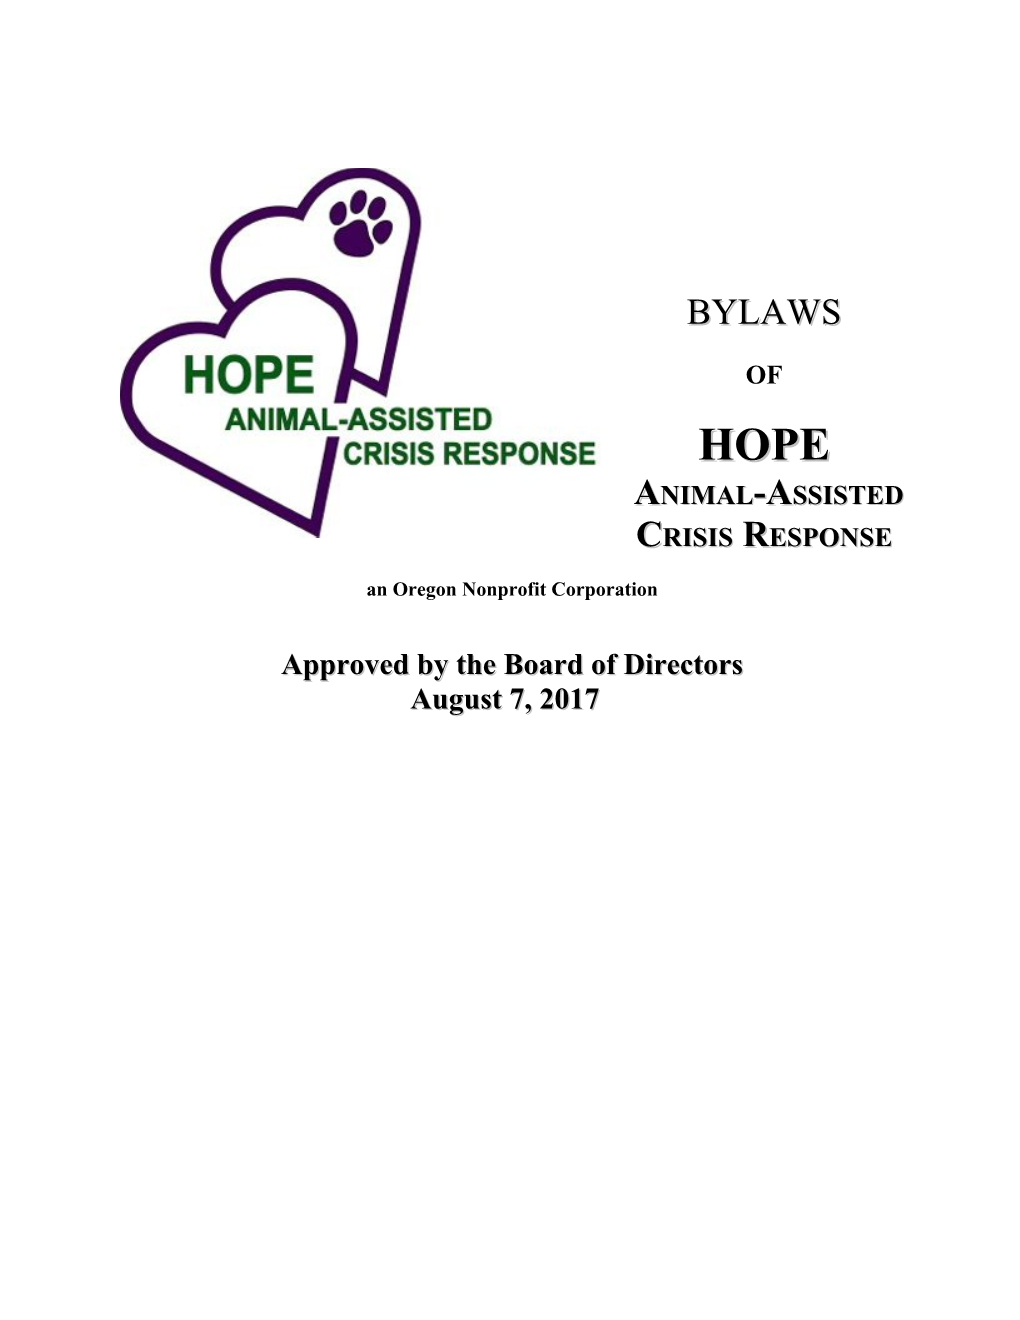 HOPE AACR Bylaws